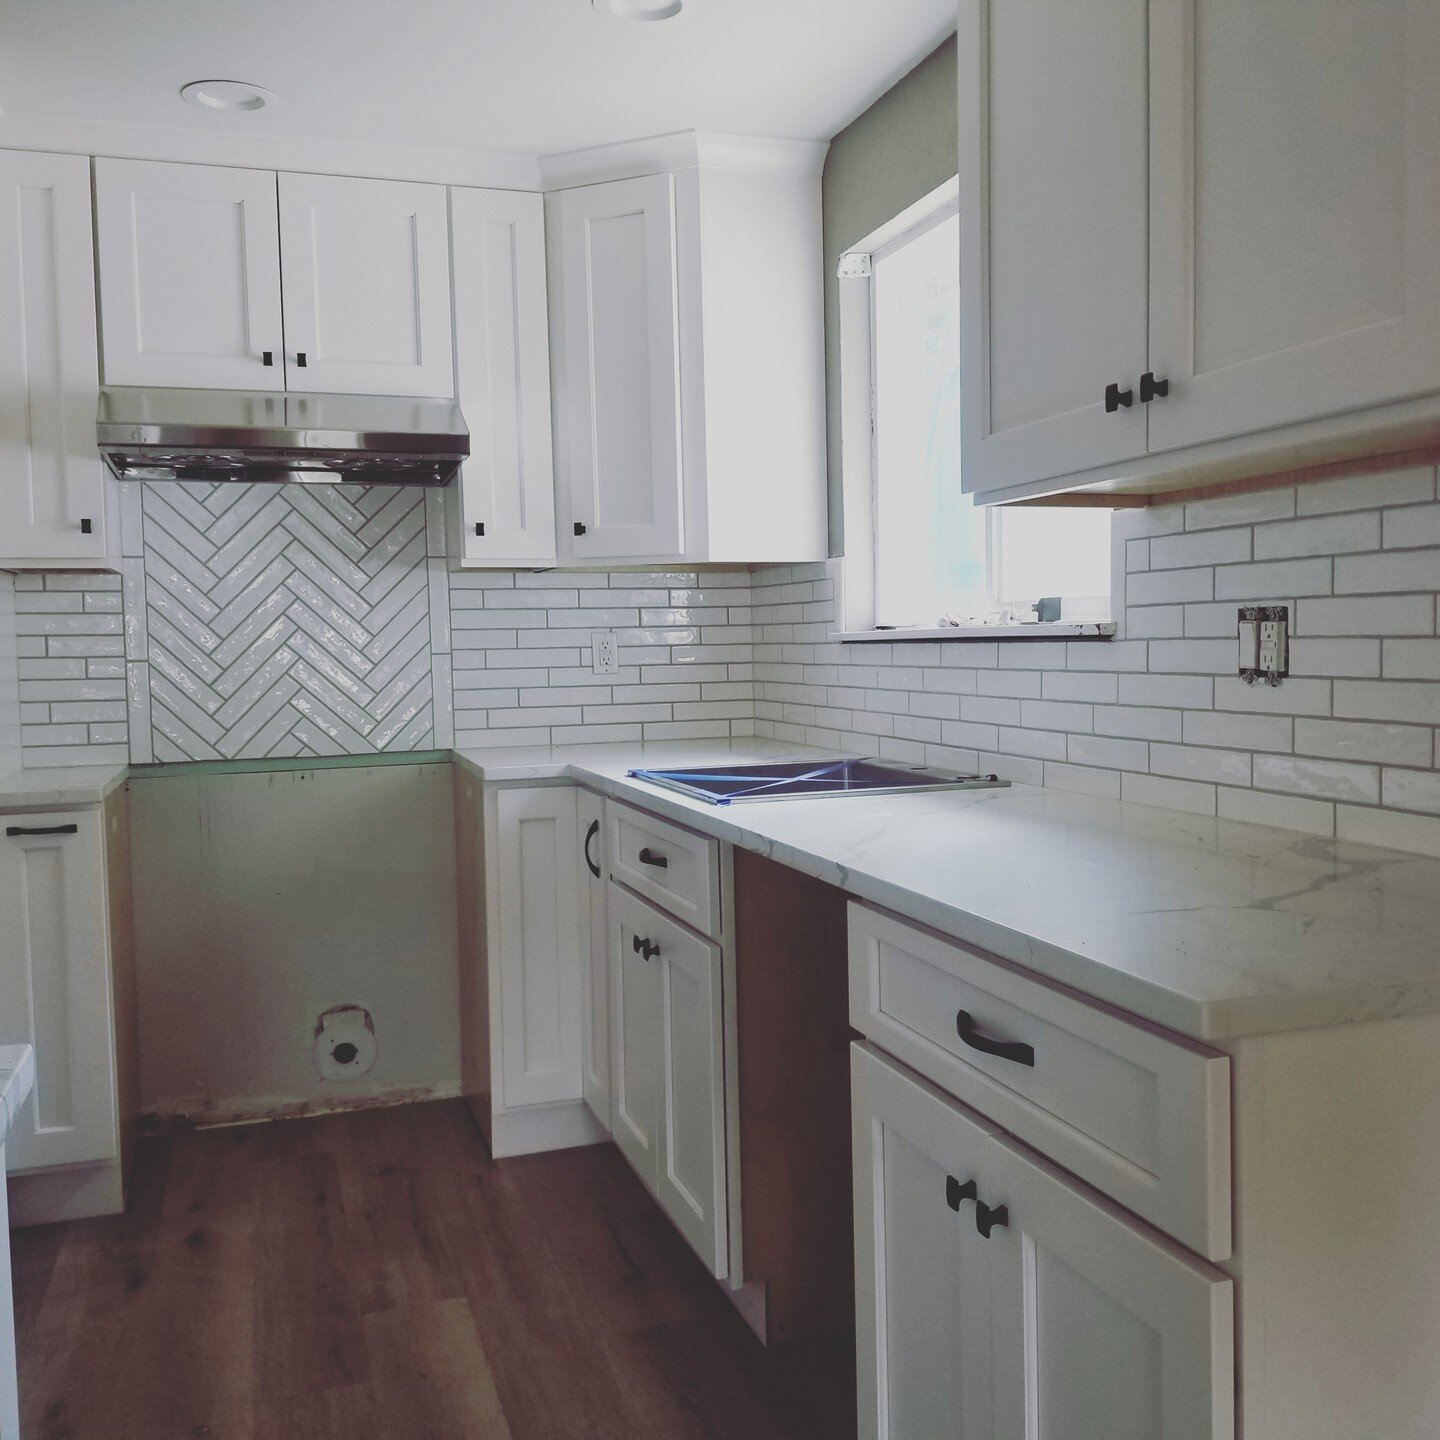 This kitchen is no ordinary subway tile with the beautiful herringbone pattern behind the stove alcove.

#kitchendesign #kitchentiles #remodel #tacomahomes #subwaytile